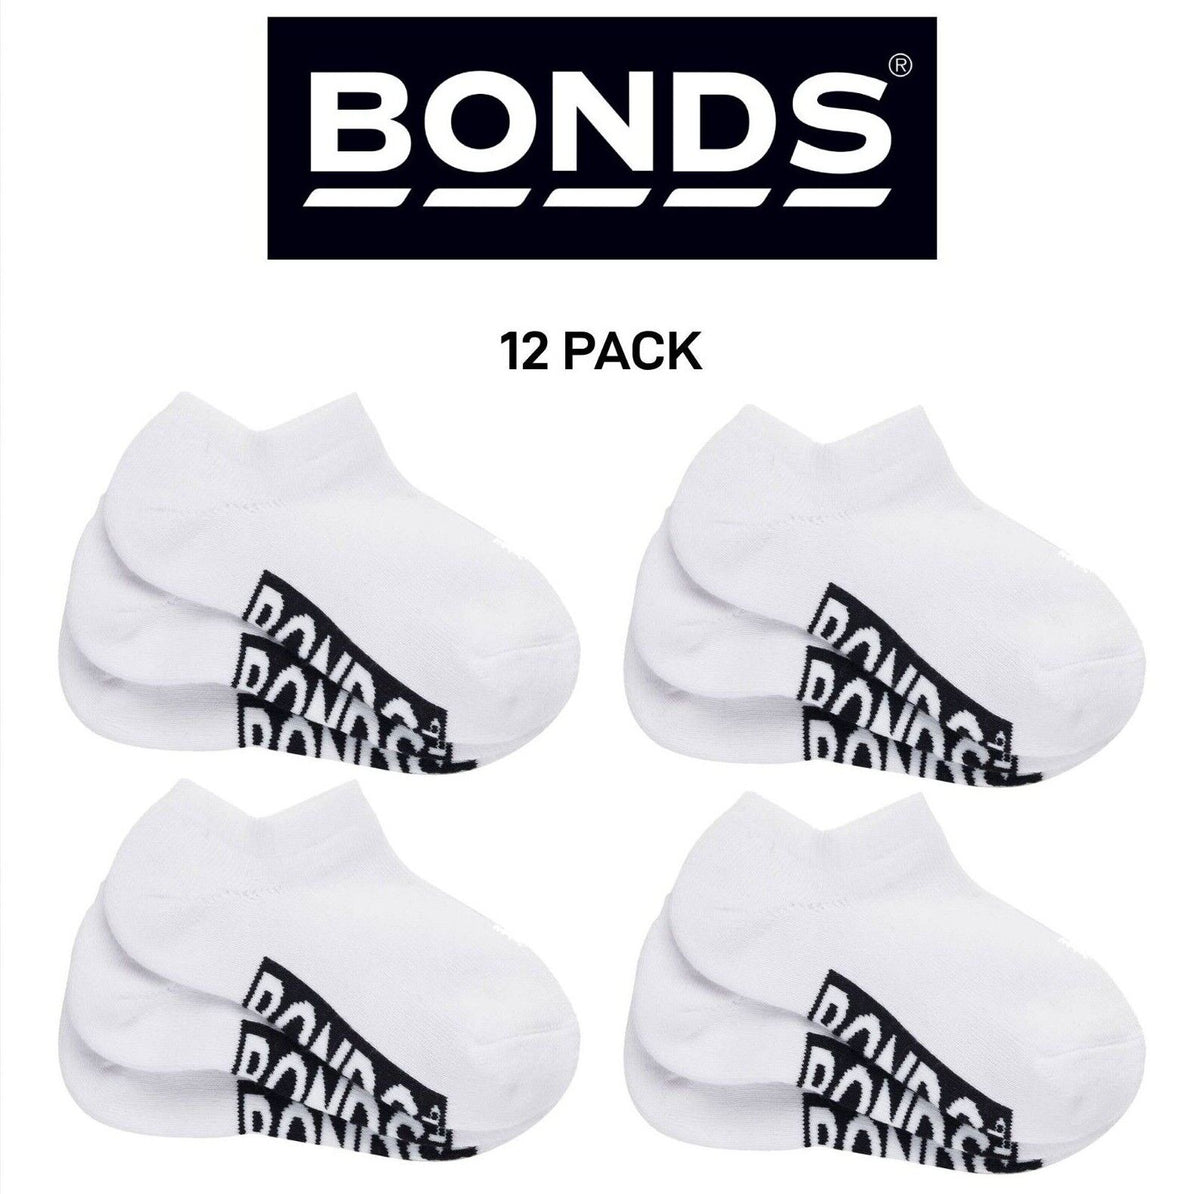 Bonds Kids Cushioned No Show Comfy Cushioned & Mesh Cooling Zones 12 Pack RXVR3N